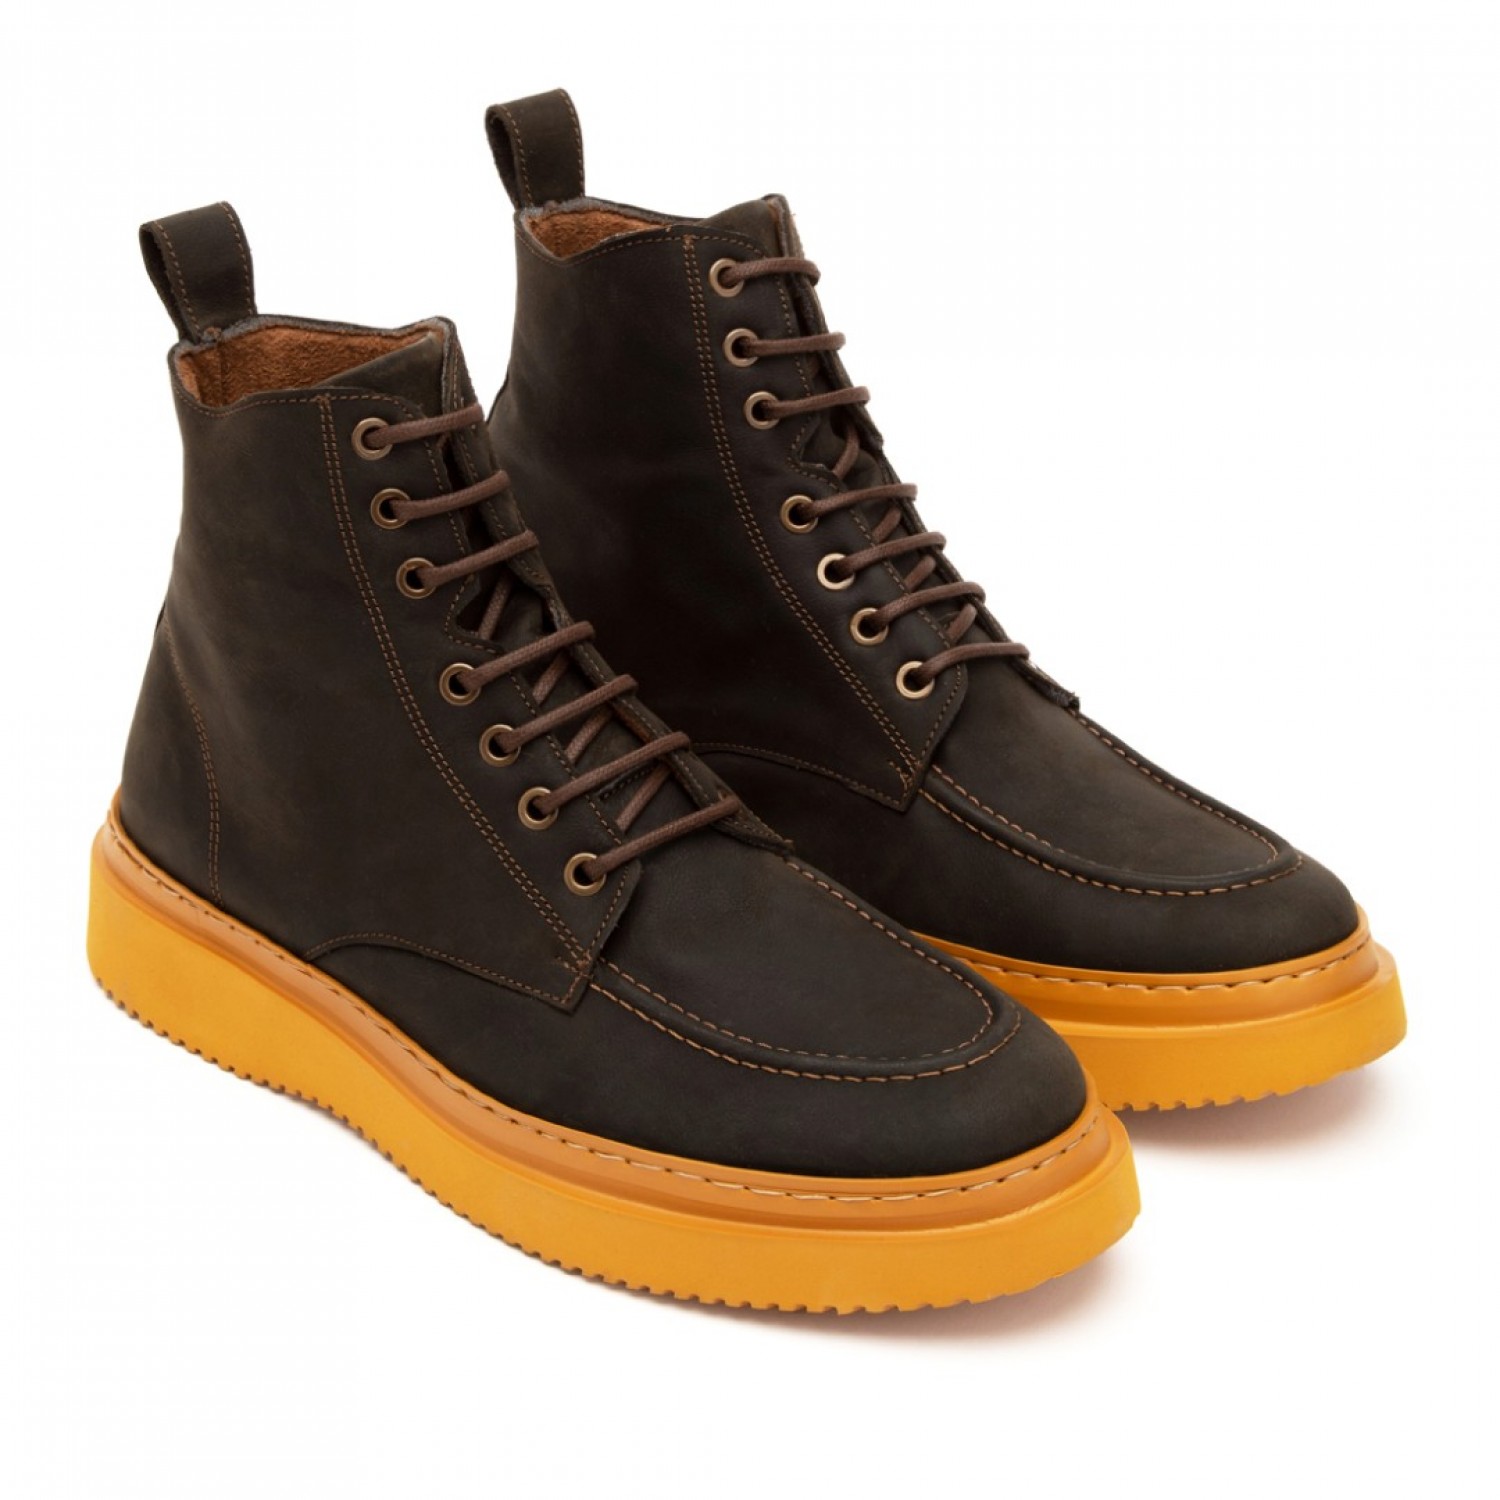 MONOCHROME BOOTS WITH CONTRAST SOLE